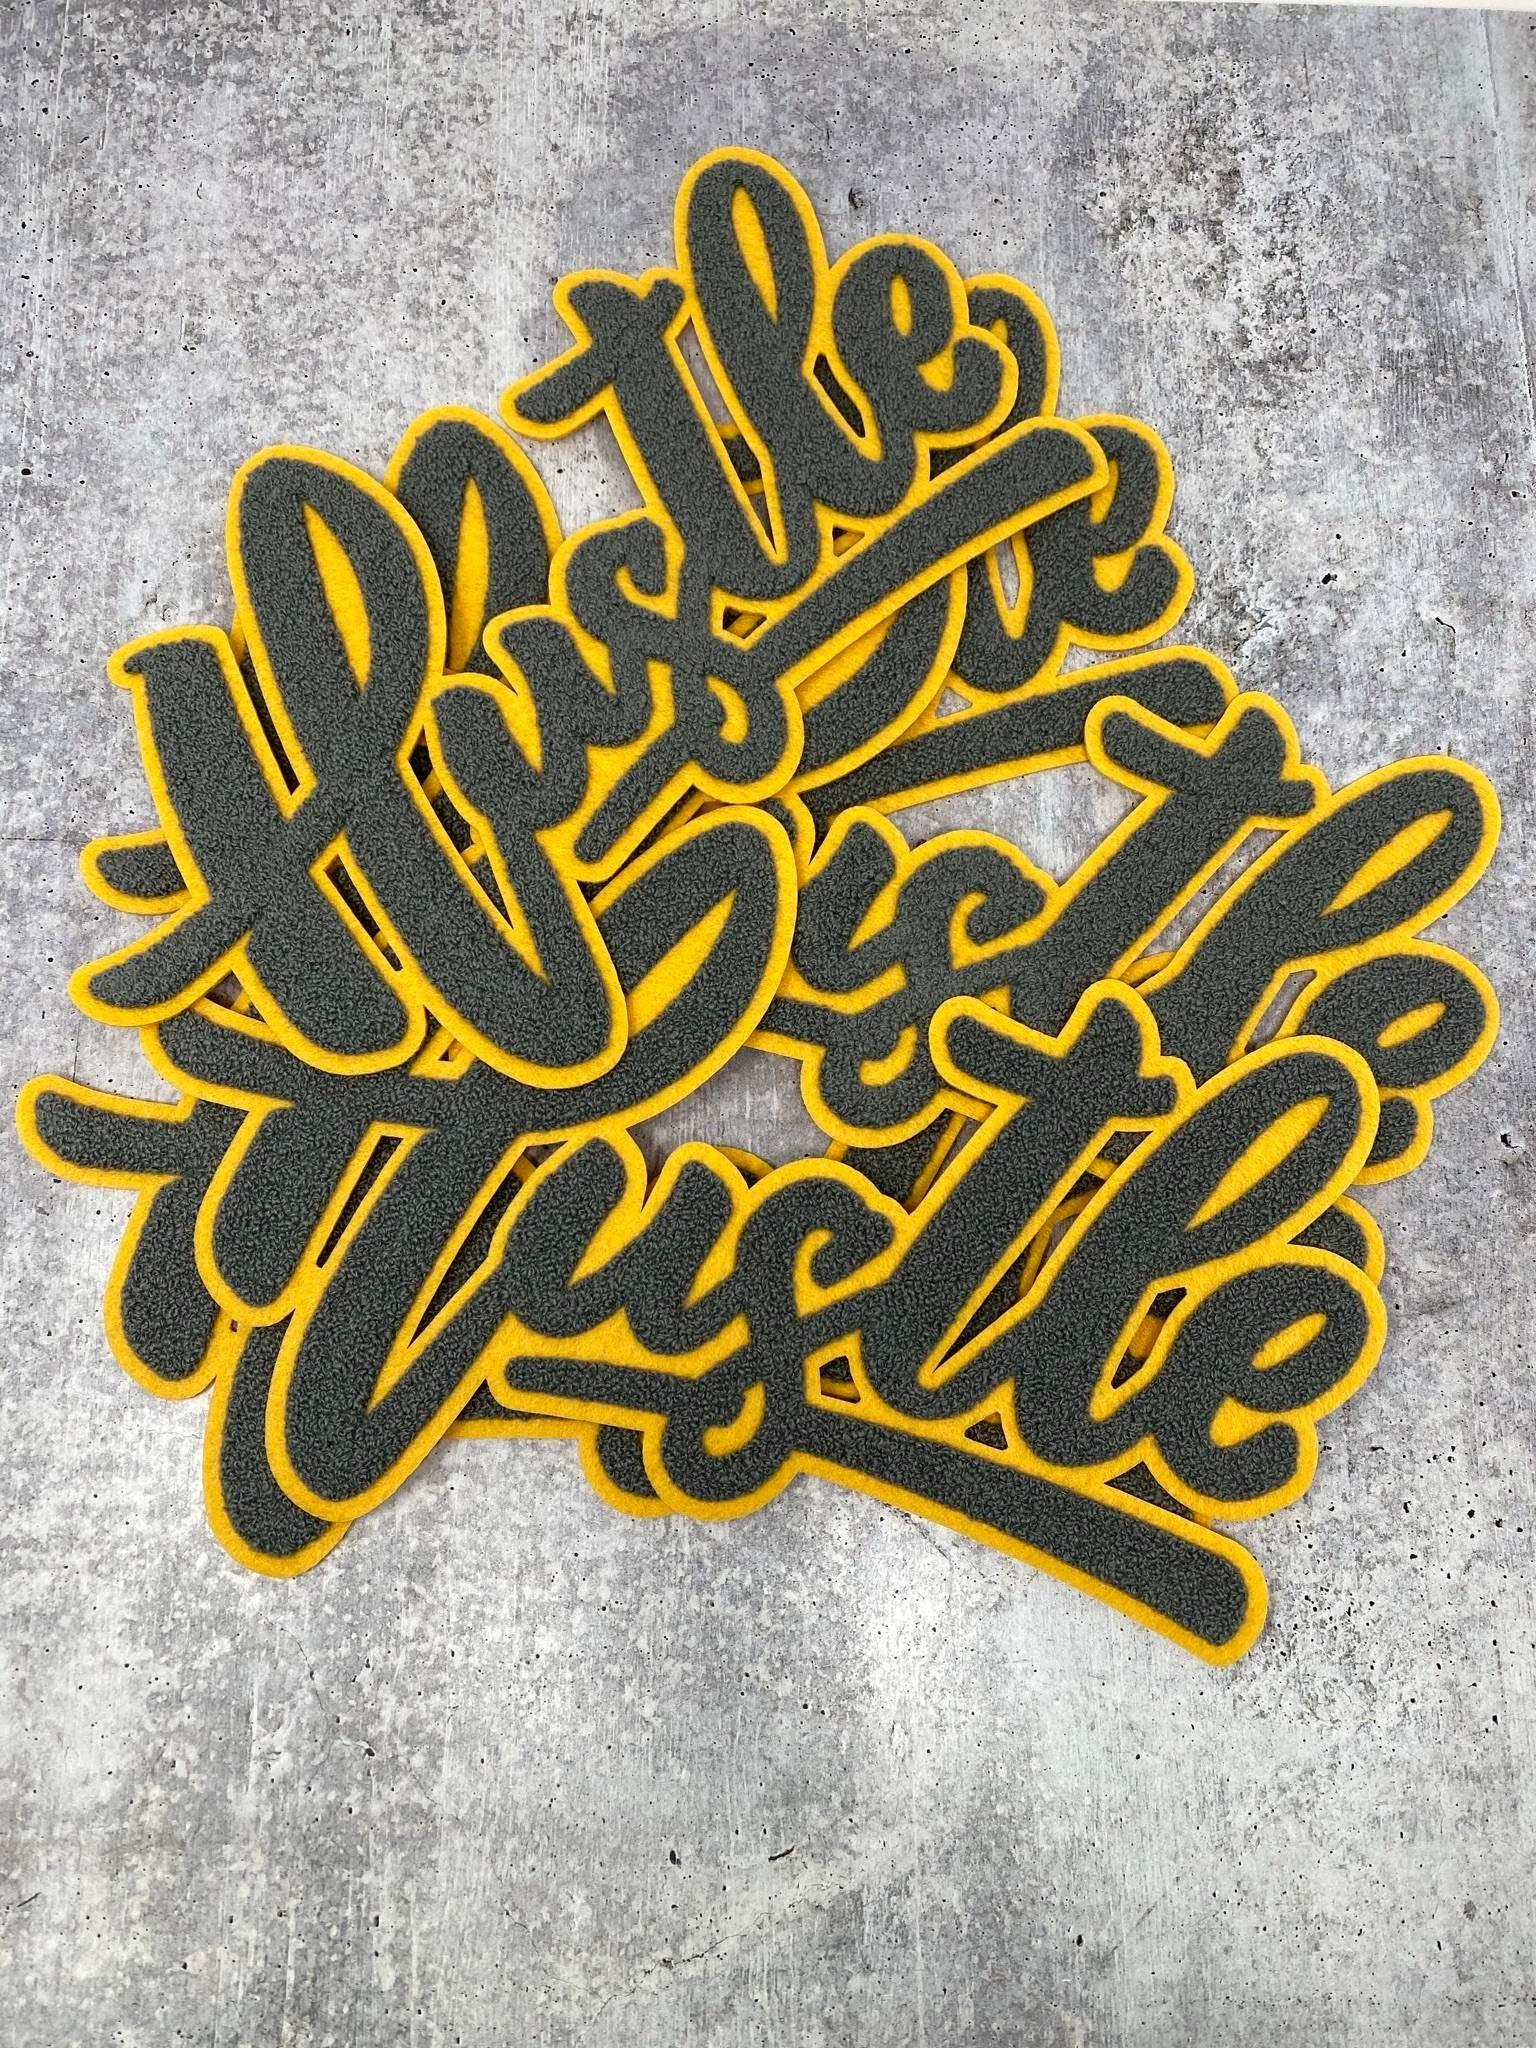 Exclusive, Gray & Gold "Hustle" Chenille Patch (iron-on) Size 10"x8", Varsity Patch for Denim Jacket, Shirts and Hoodies, Large Patch